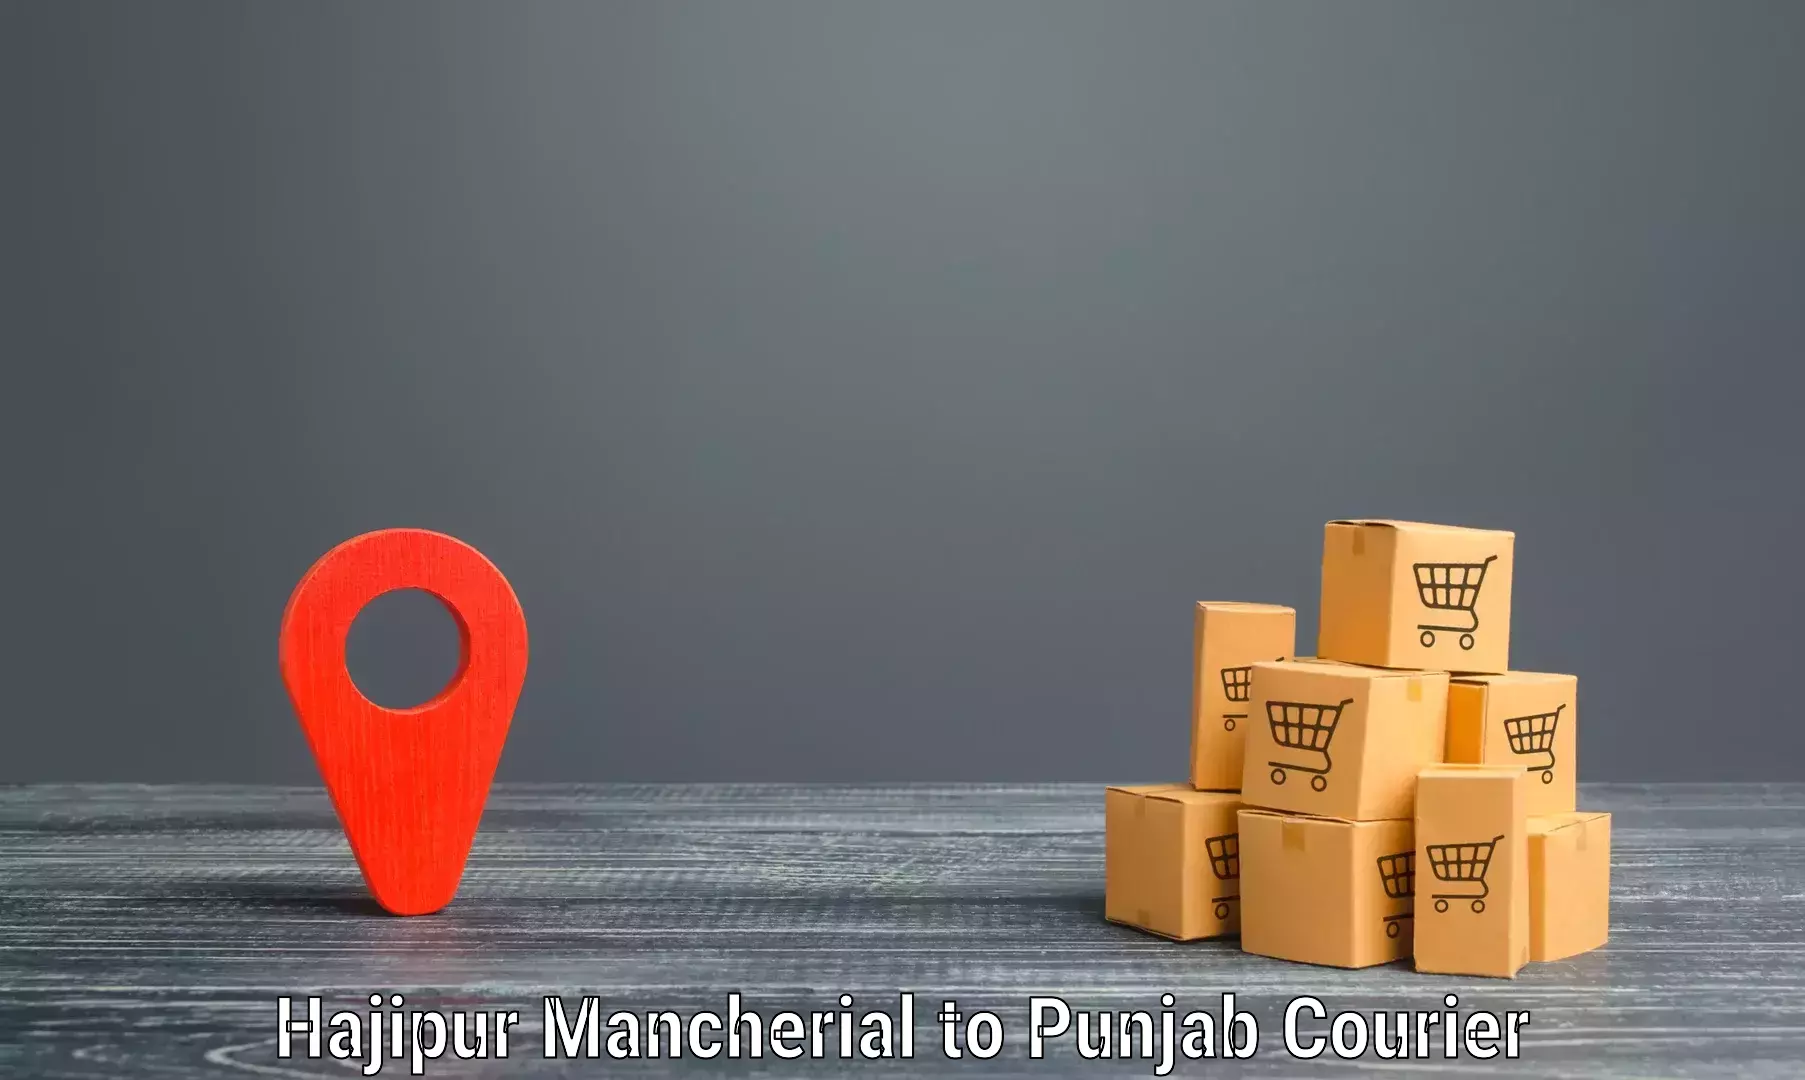 Professional courier services Hajipur Mancherial to Abohar